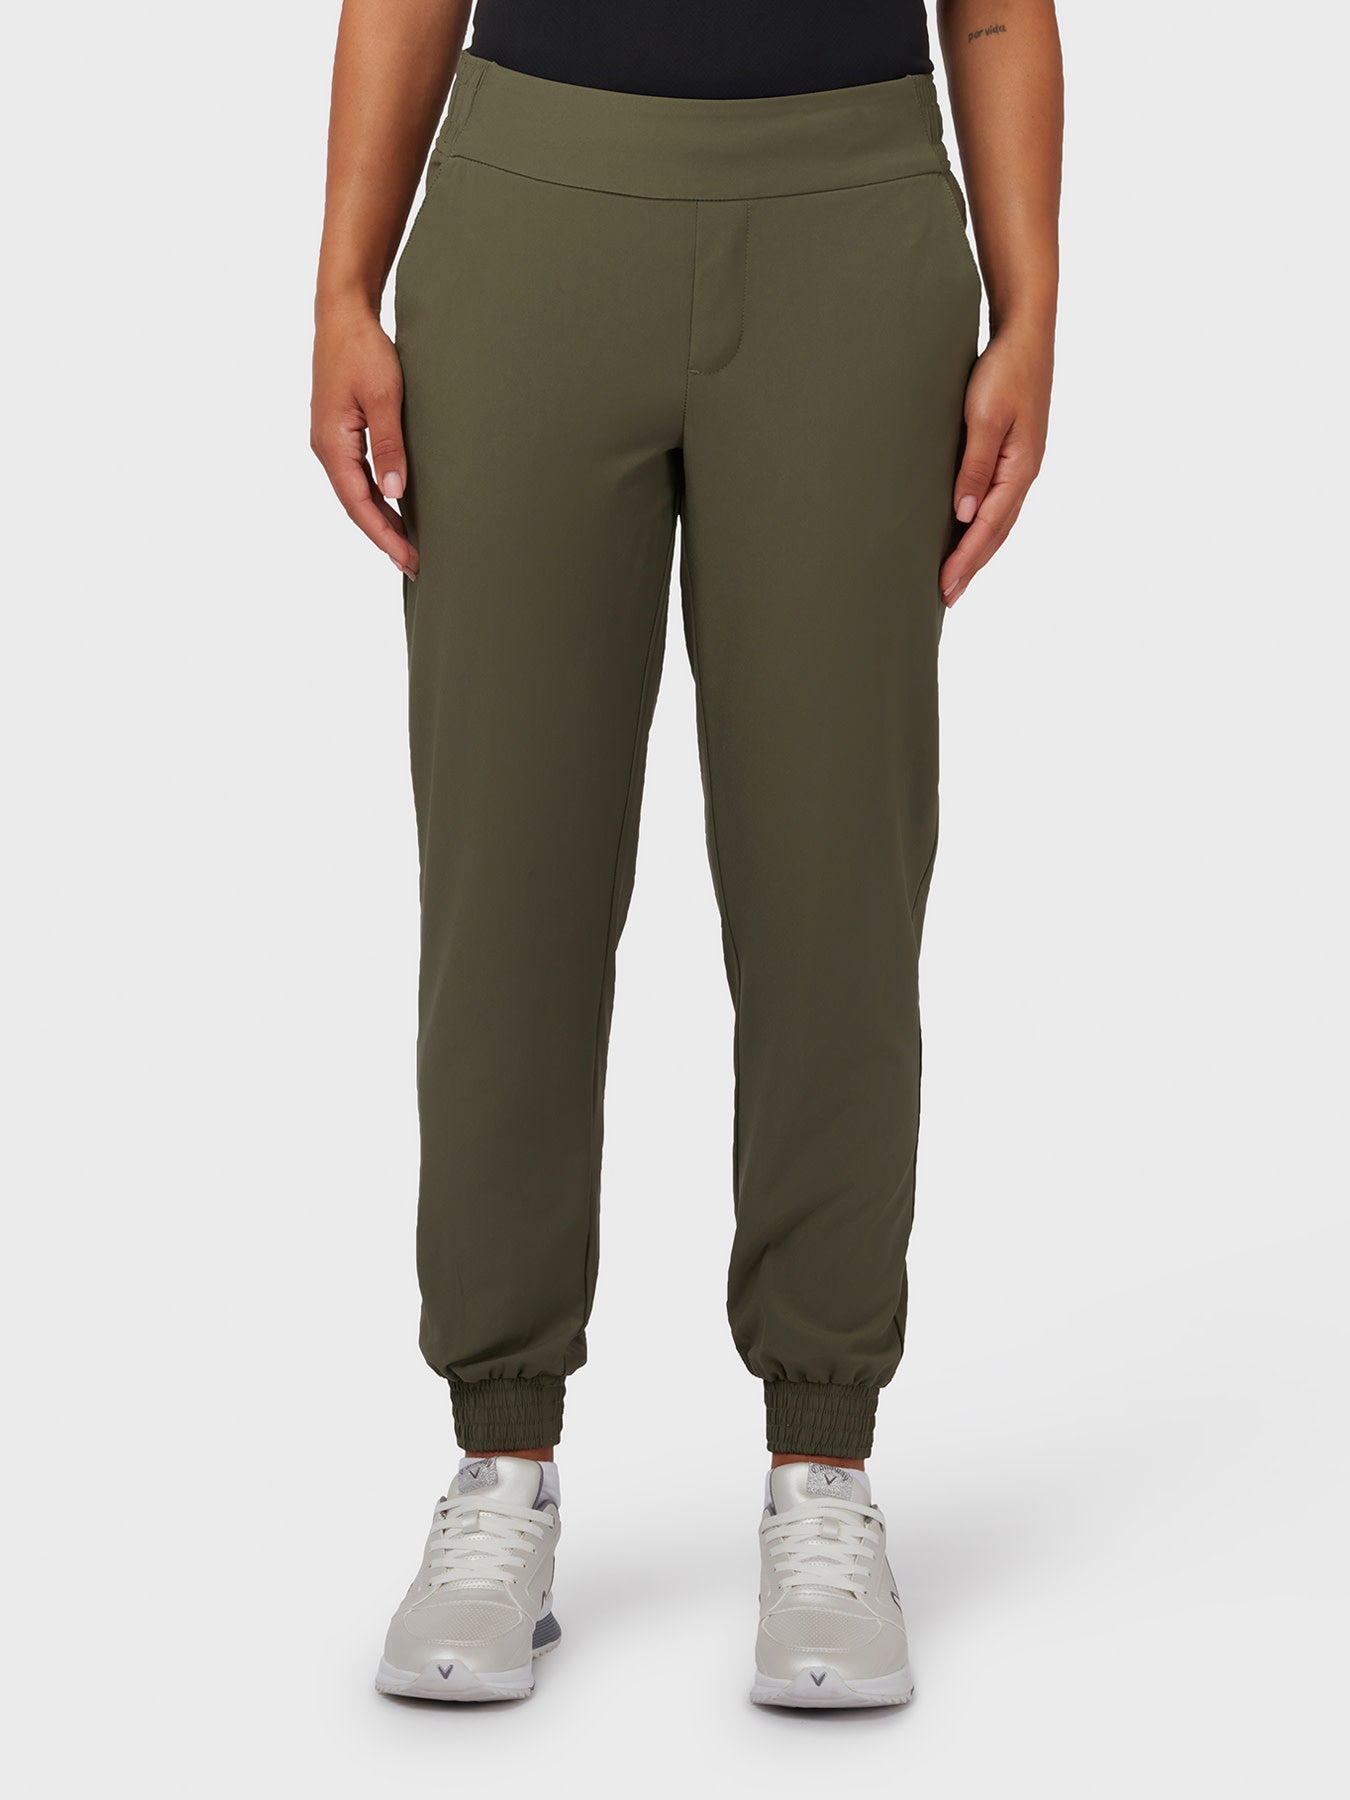 View Lightweight Womens Joggers In Industrial Green information